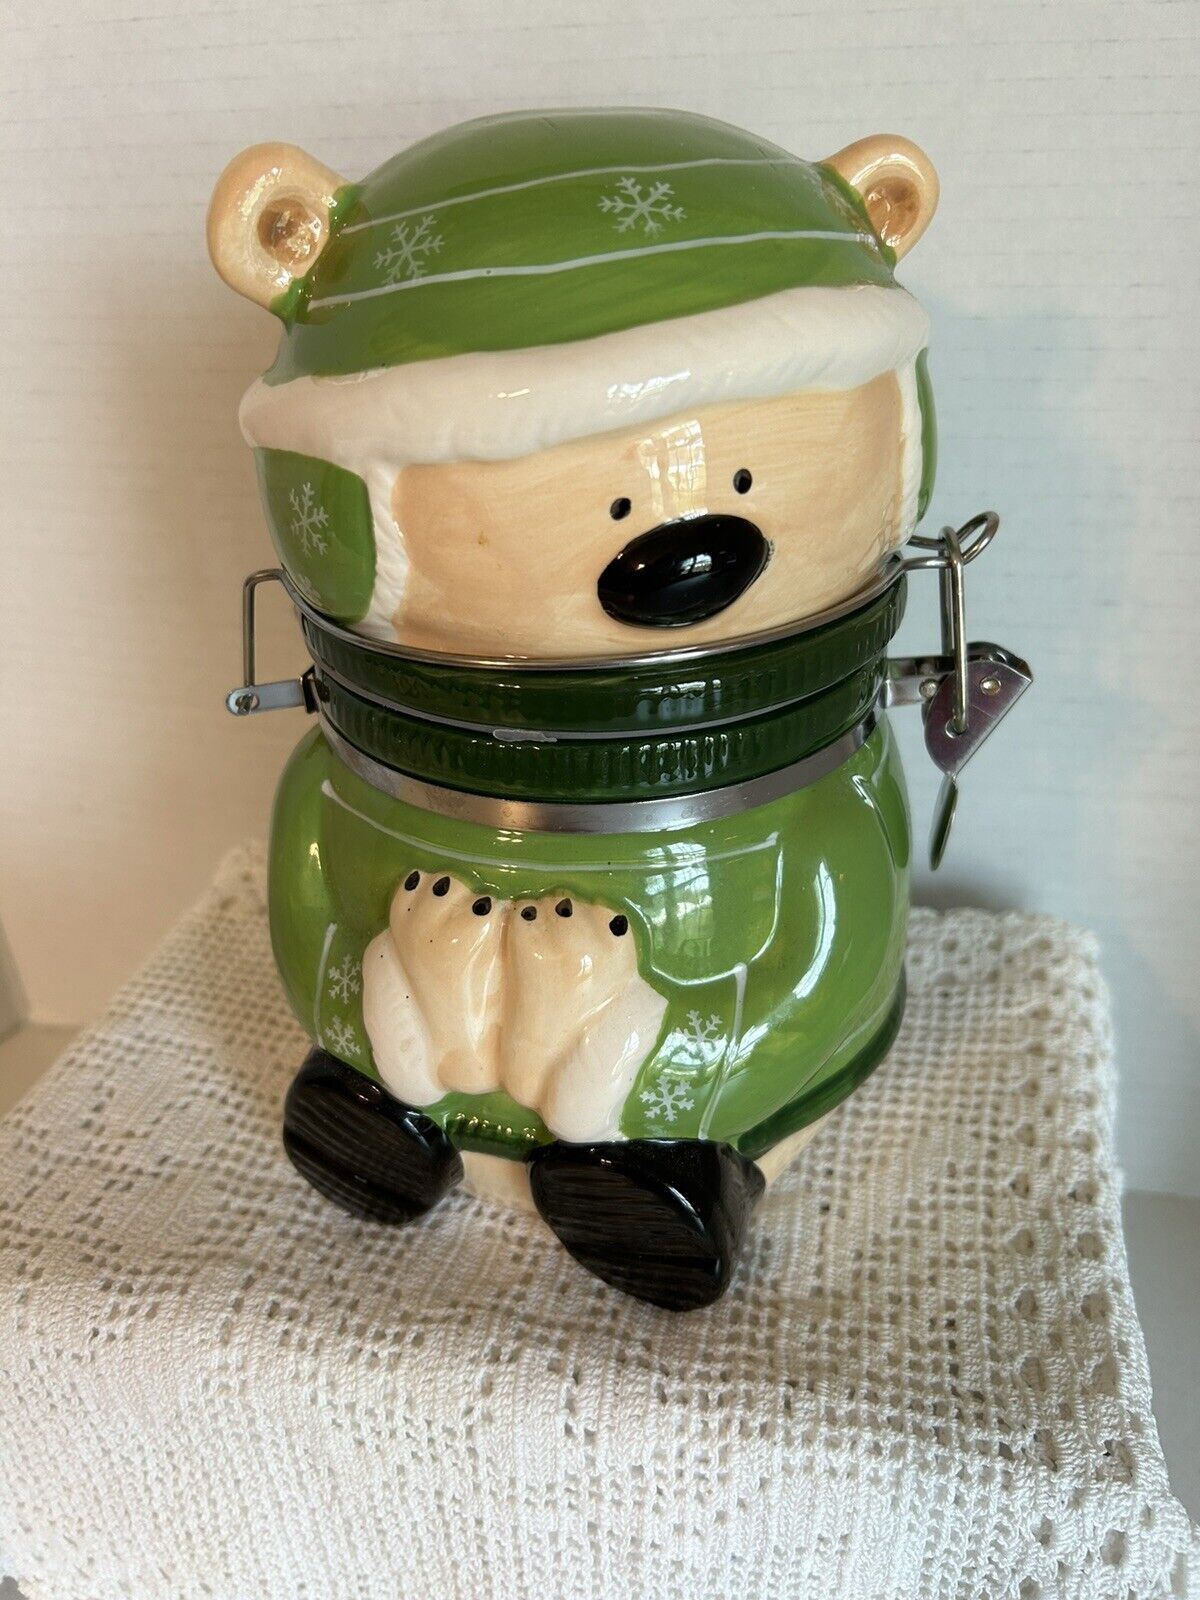 Conagra Swiss Miss Teddy Bear with Green Sweater sealed Container Jar